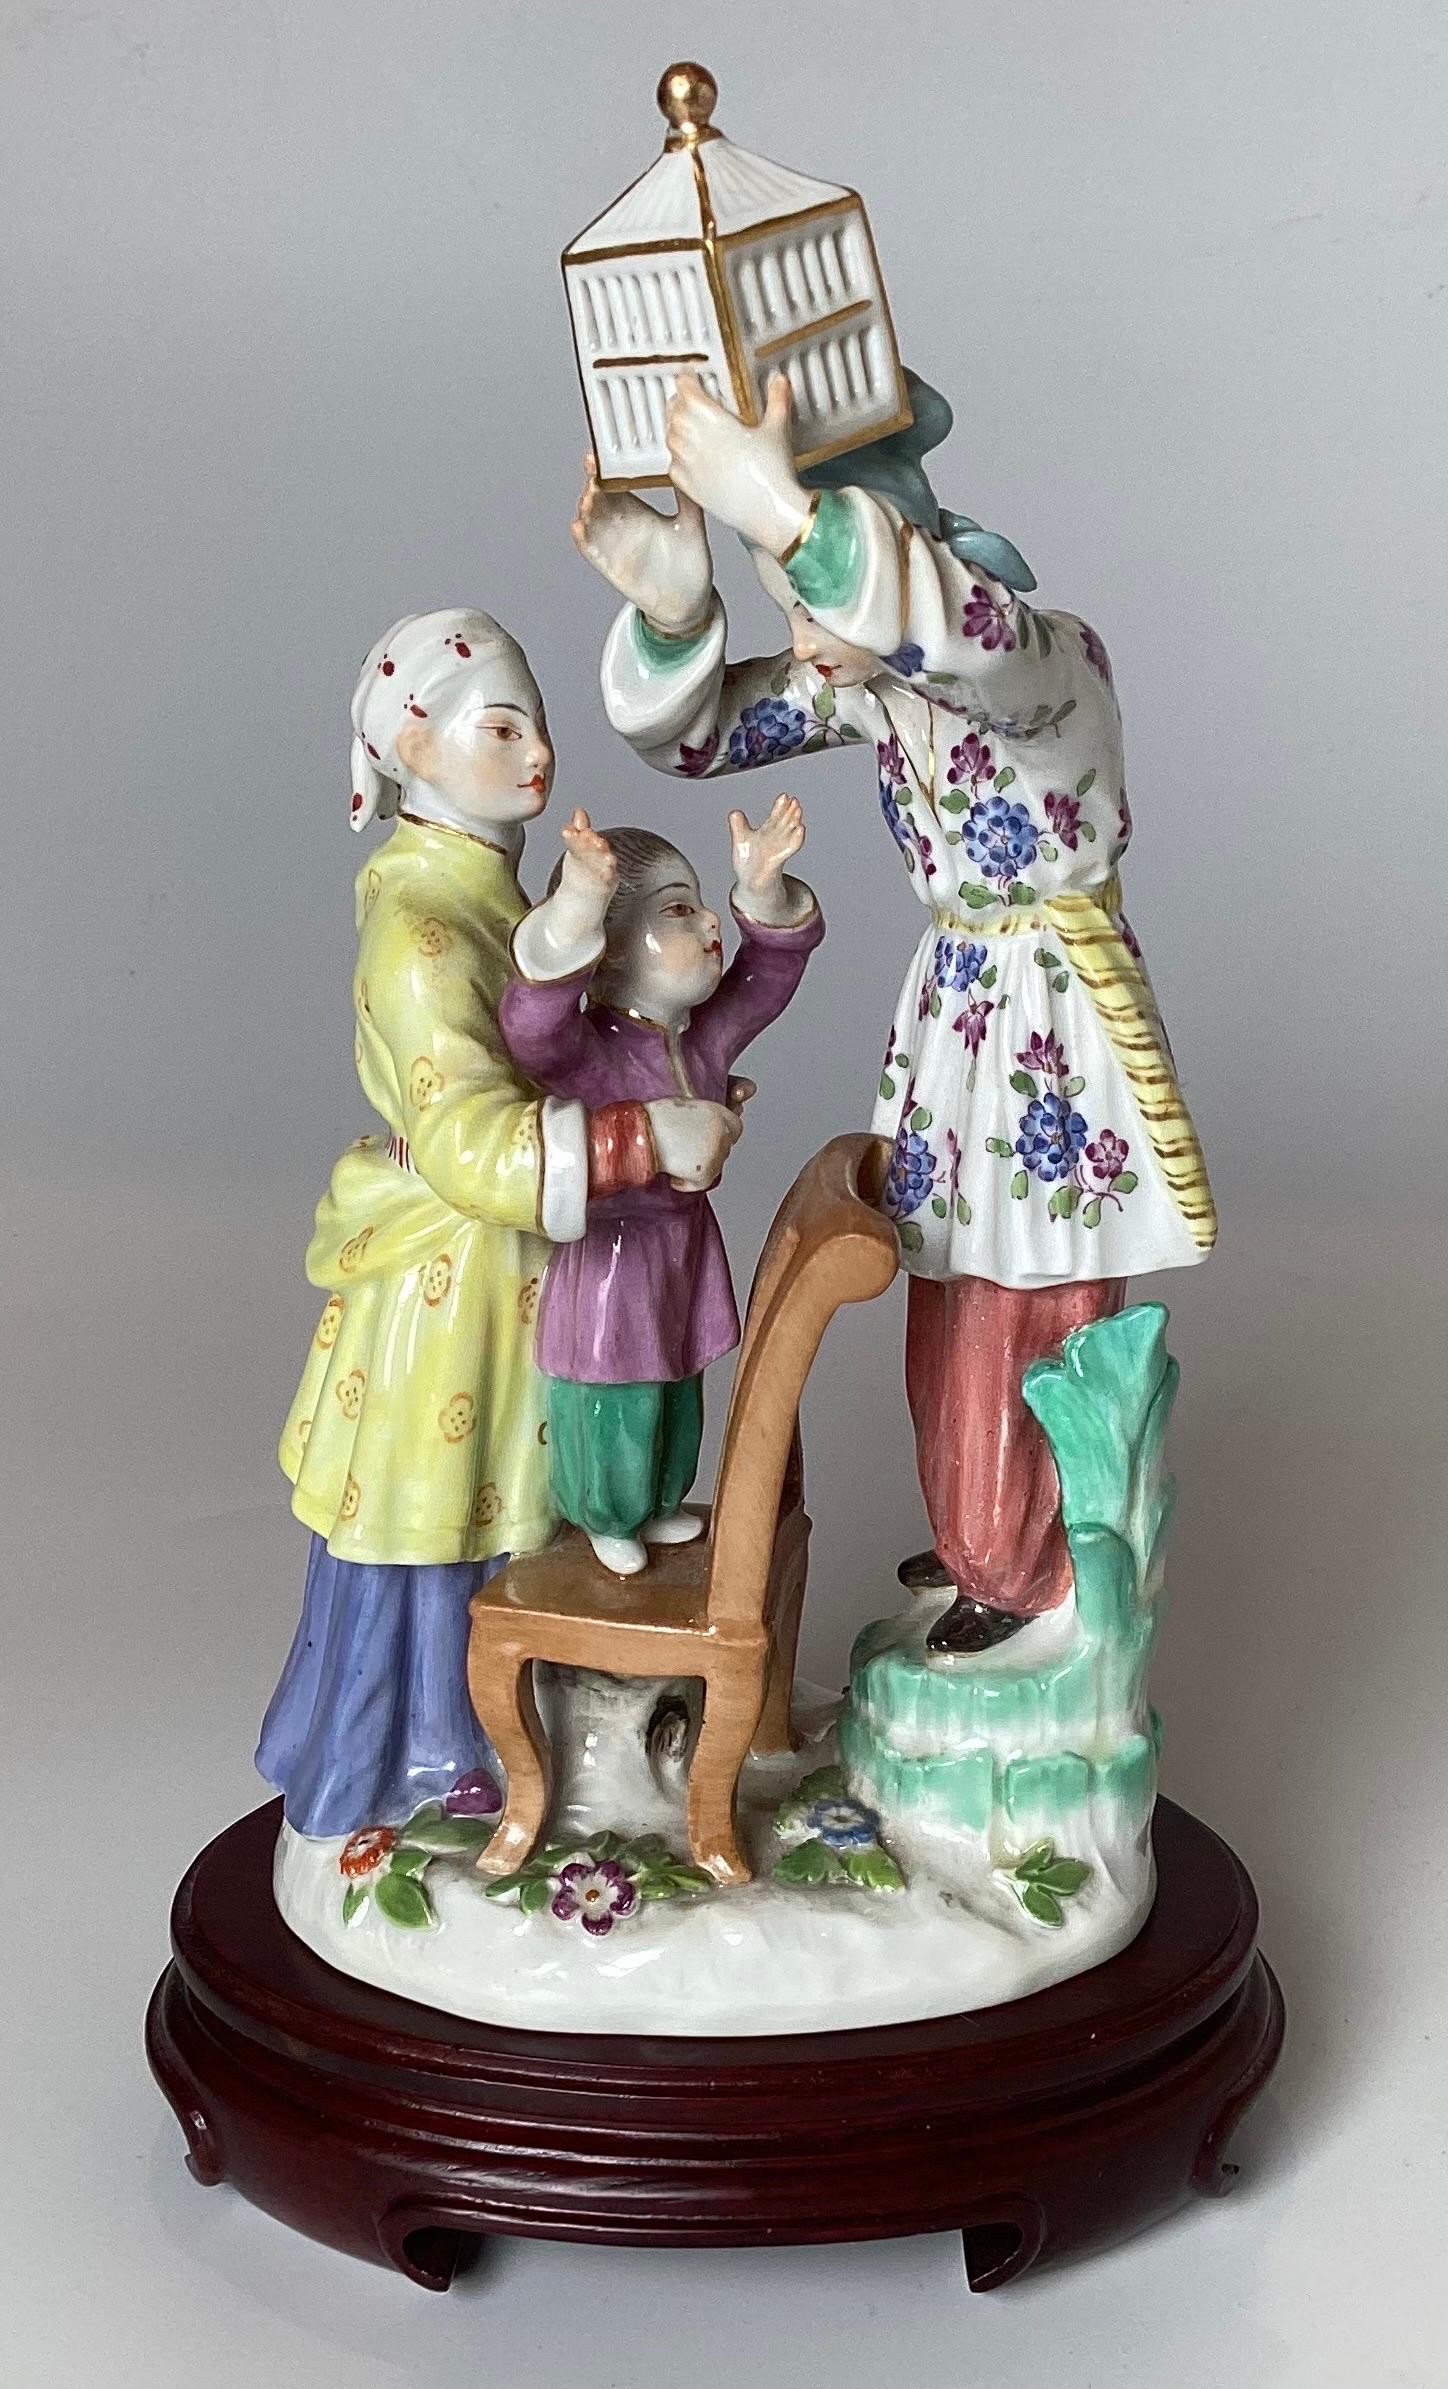 Meissen porcelain figure chinoiserie style on wood base.  The hand painted figures one holding a bird cage with the Meissen blue under glaze mark.  The wood stand added later is included. 